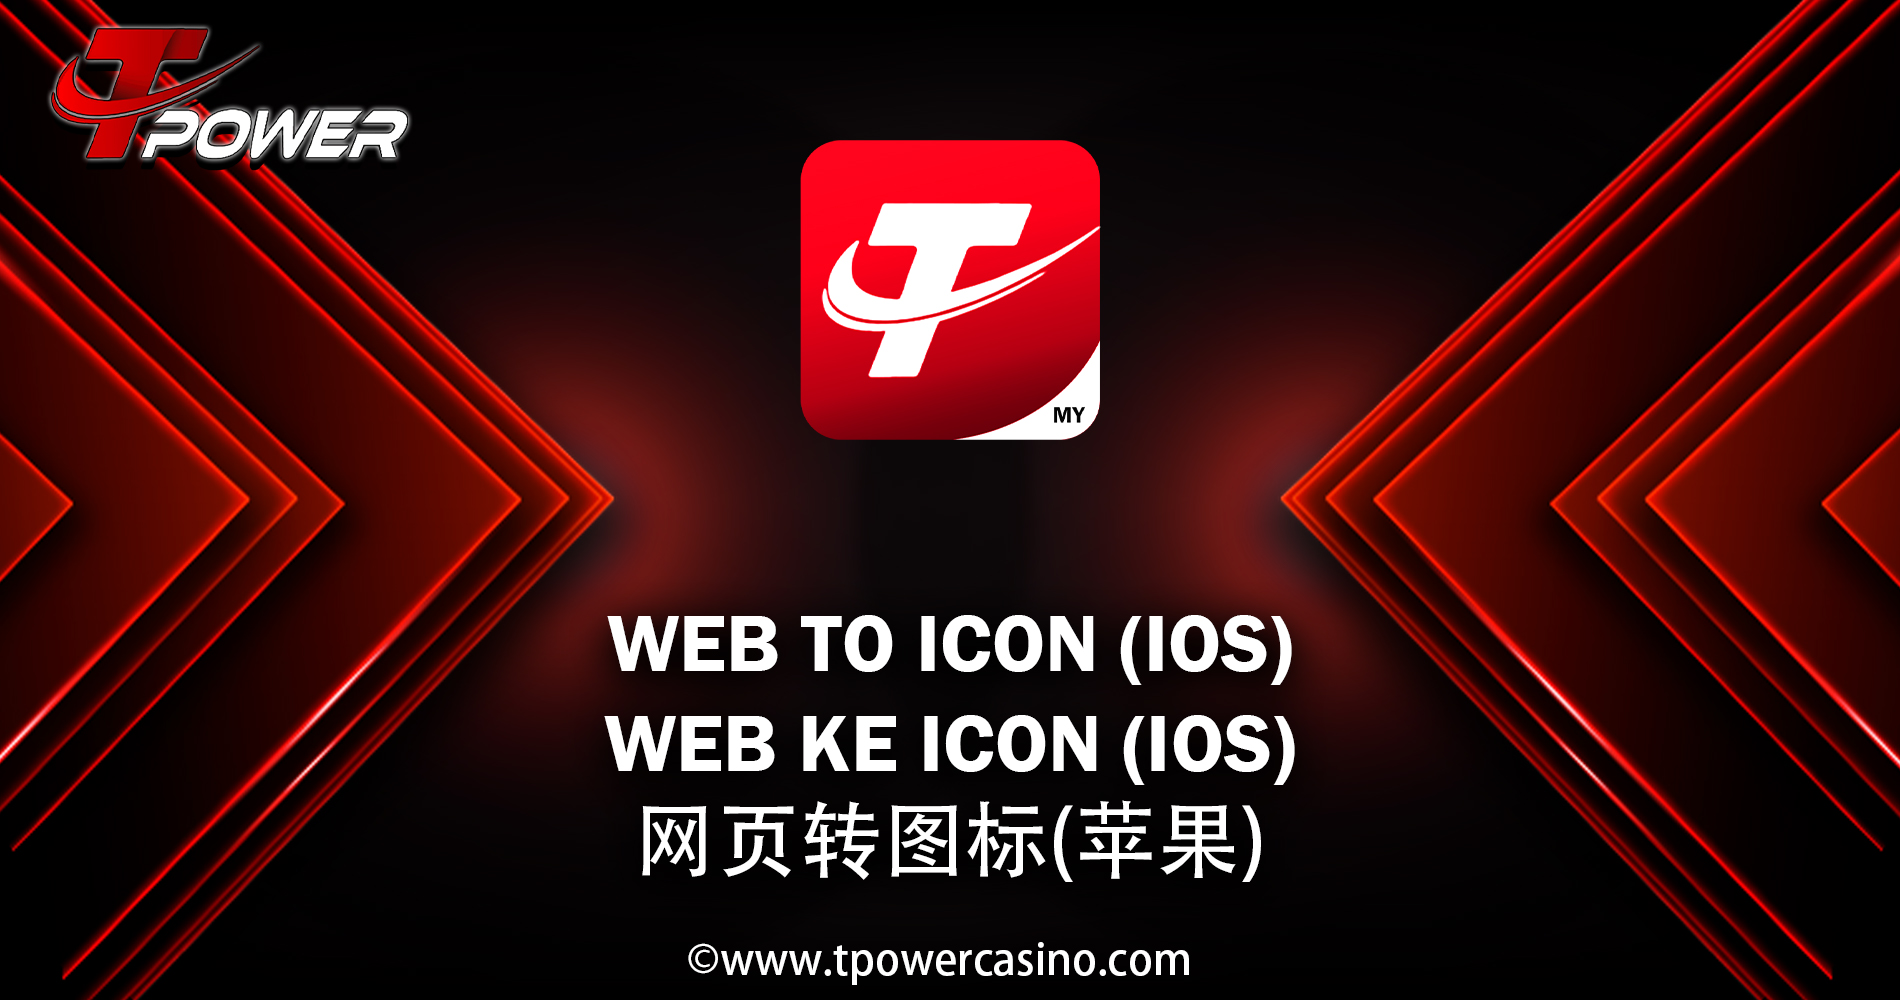 web to icon (ios) step封面